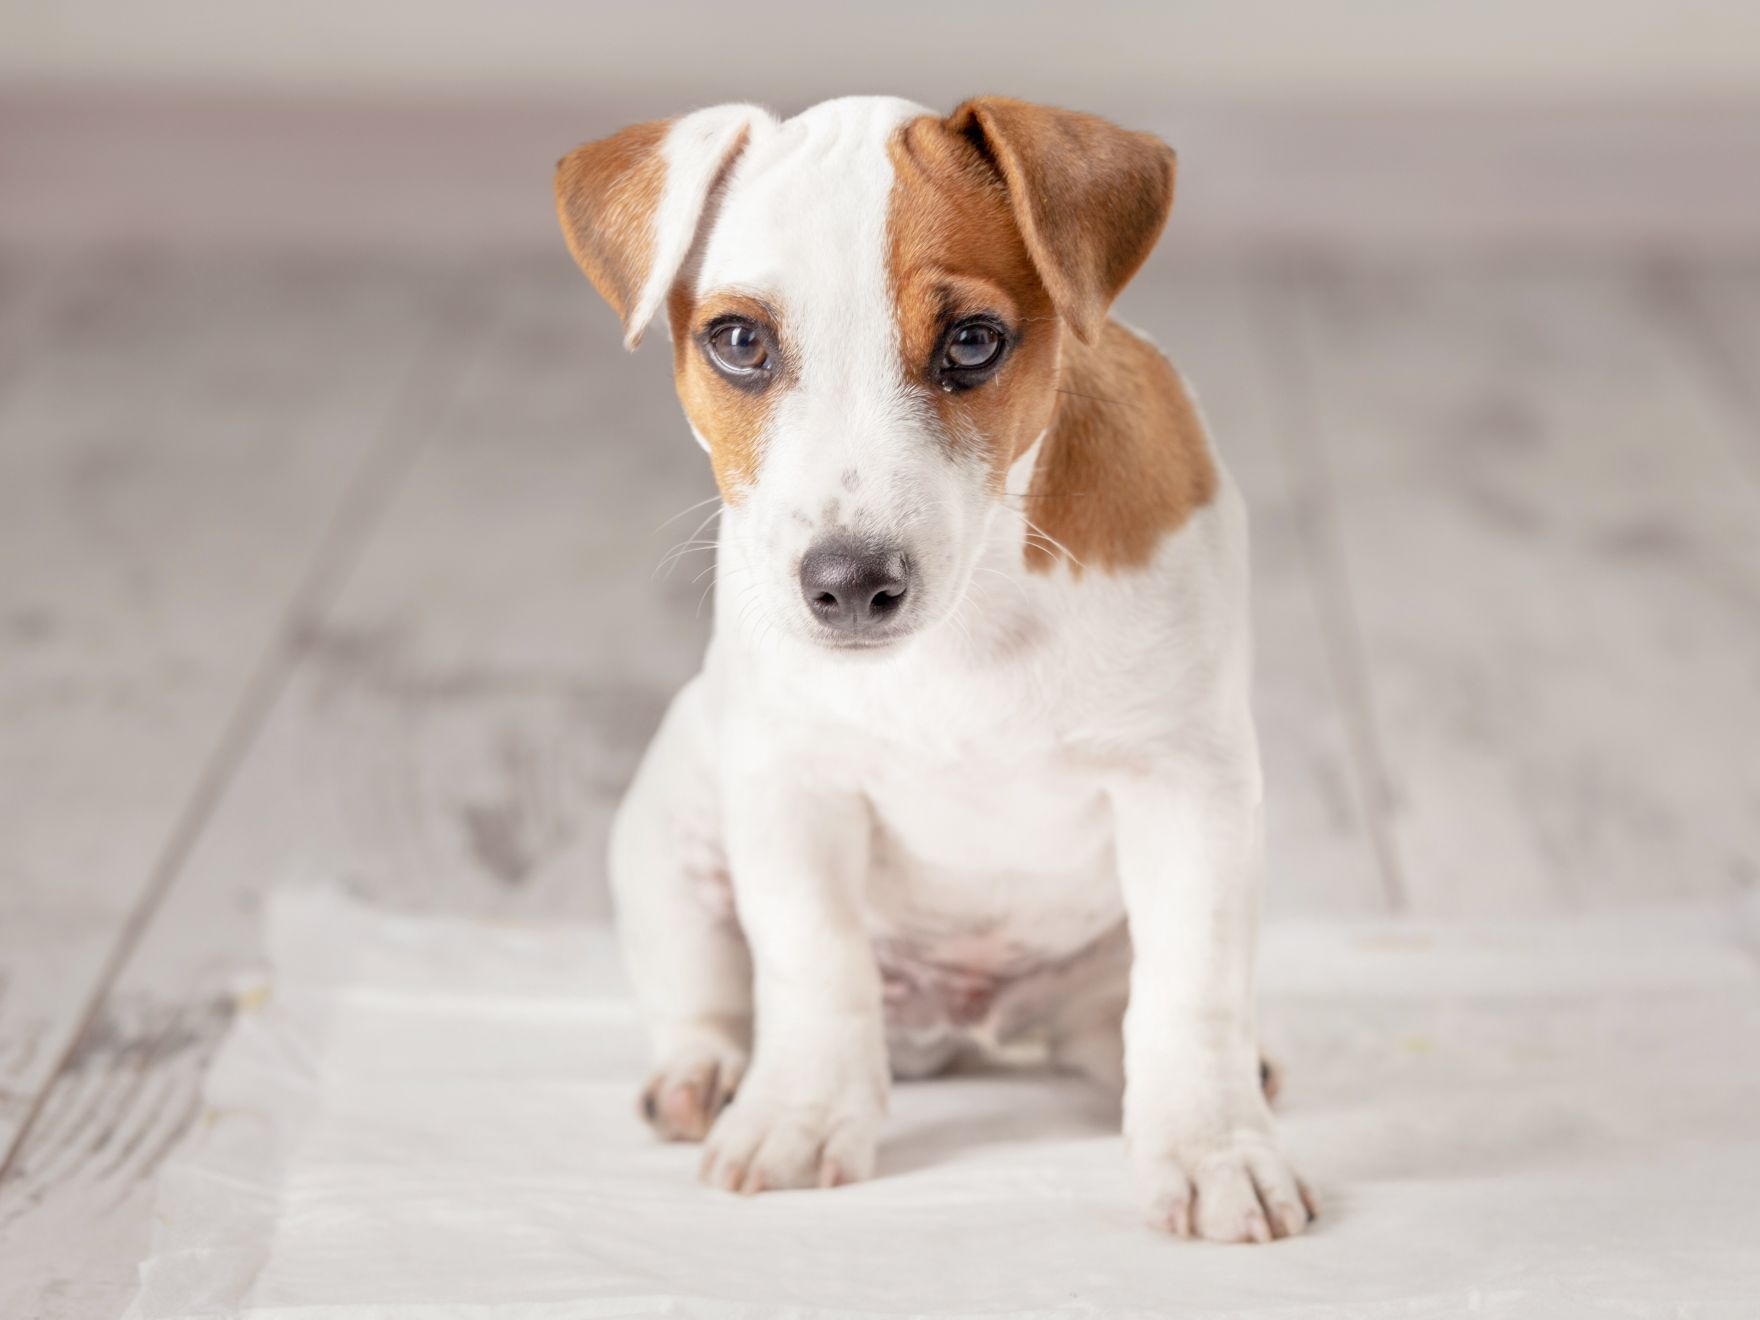 Jack Russell Terrier puppy sitting indoors on a puppy house training pad